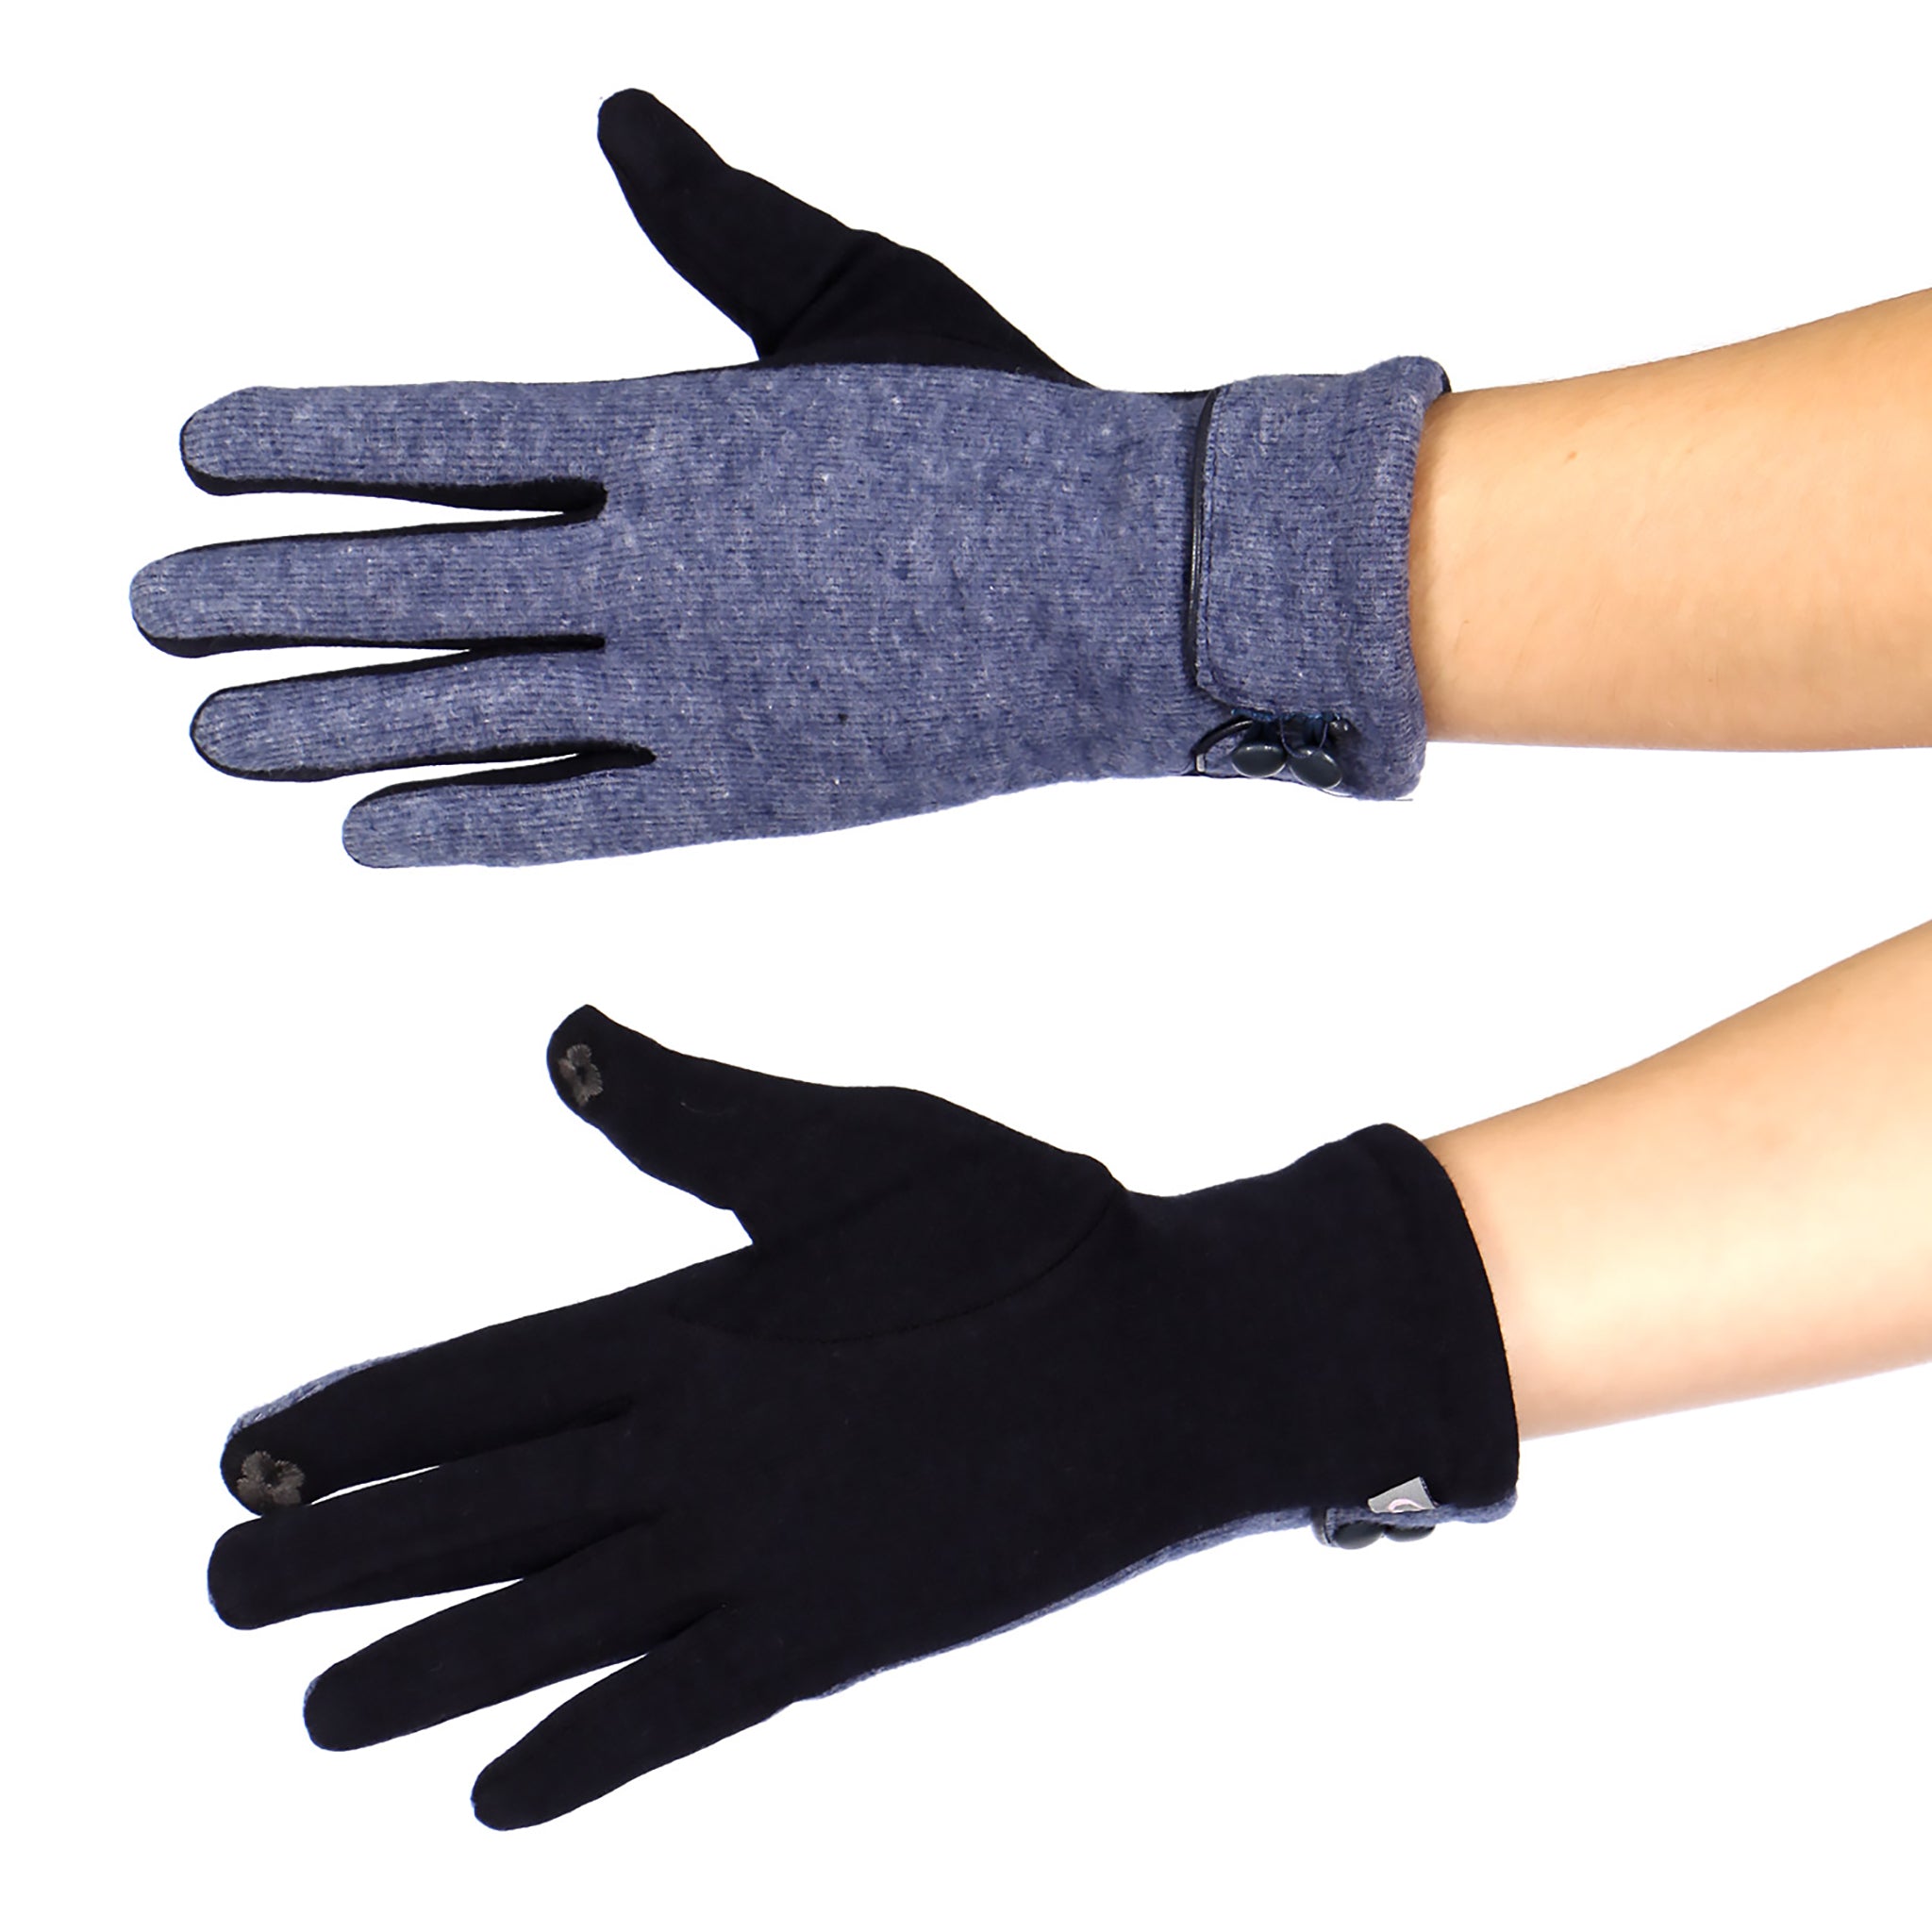 Double Button Touch Gloves
Thermal button gloves with faux fur inside 9 inches x 3.5 inches 60% Acrylic 40% Polyester
Double Button Touch Gloves
Thermal button gloves with faux fur inside 9 inches x 3.5 inches 60% Acrylic 40% Polyester
GL1147

$19.99
$19.99
$19.99
gloves
Gloves
Apexx/Fashionunic
$19.99
$19.99
$19.99
Color: Navy


Le' Diva Boutique Store